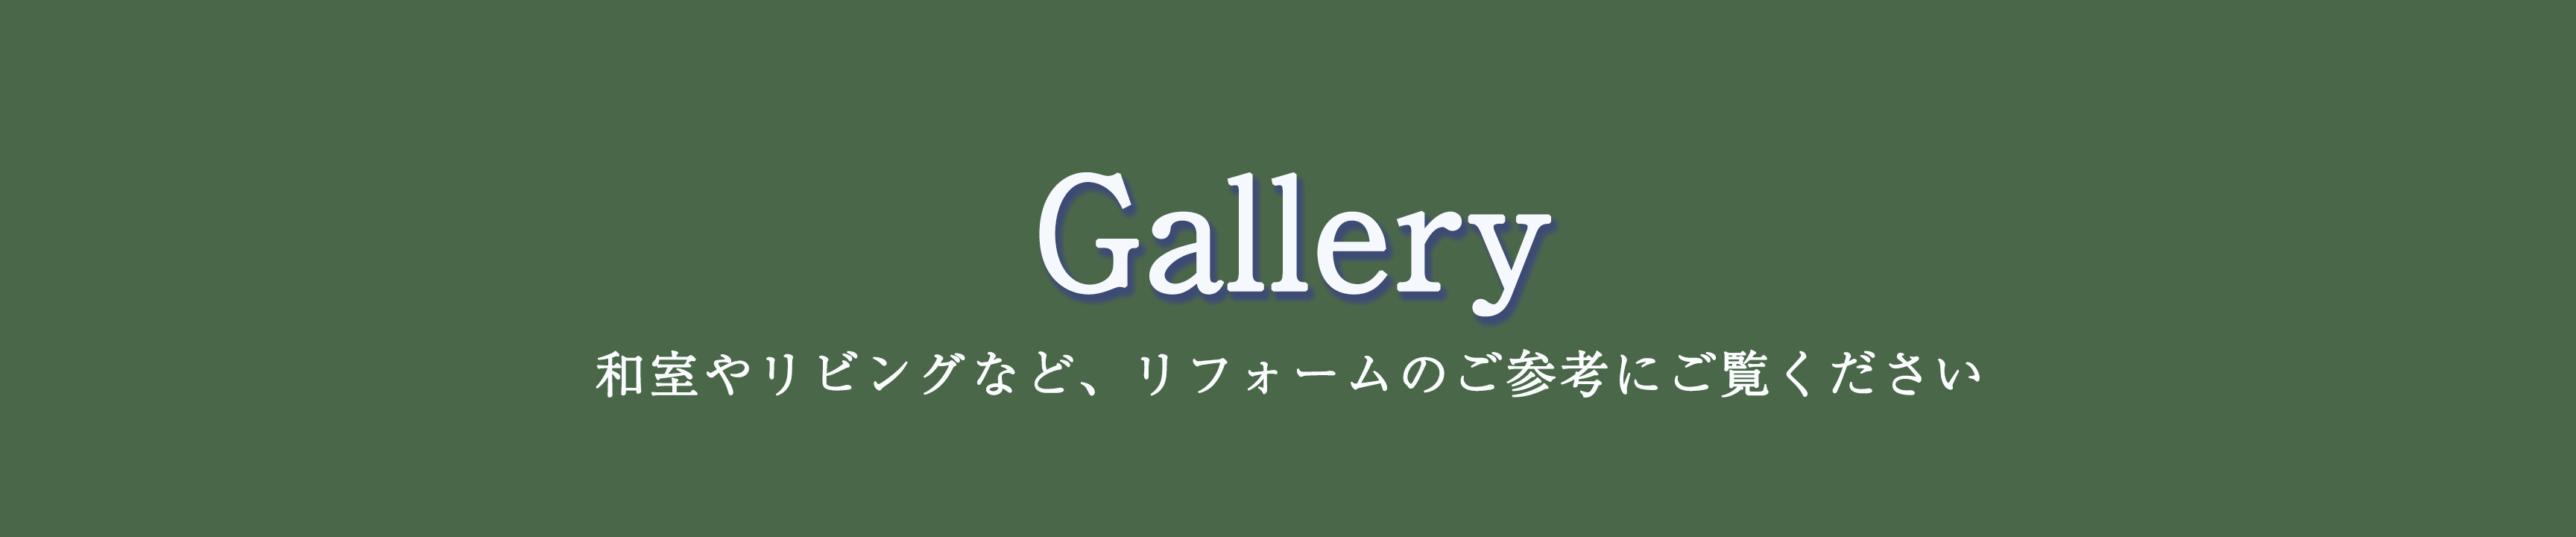 galleryのご案内